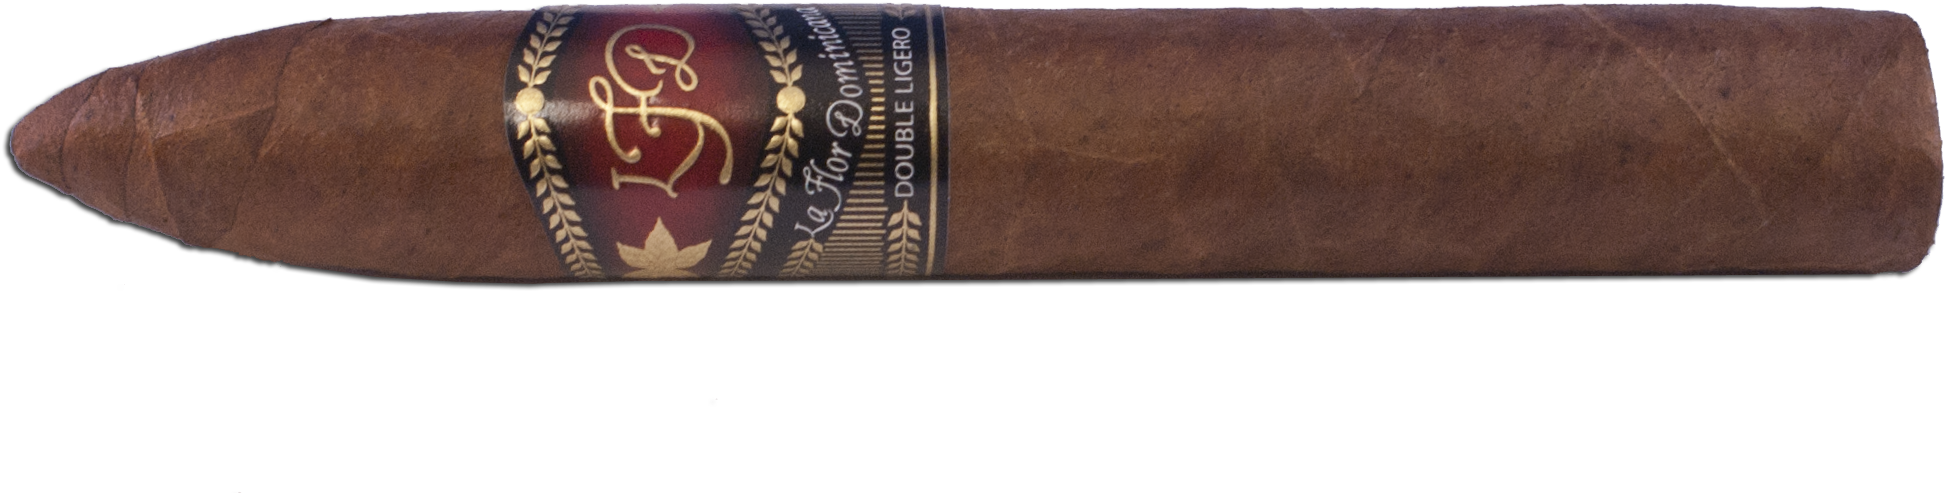 Lfd Double Ligero Torpedo Limited Edition - Cigars (2191x707), Png Download